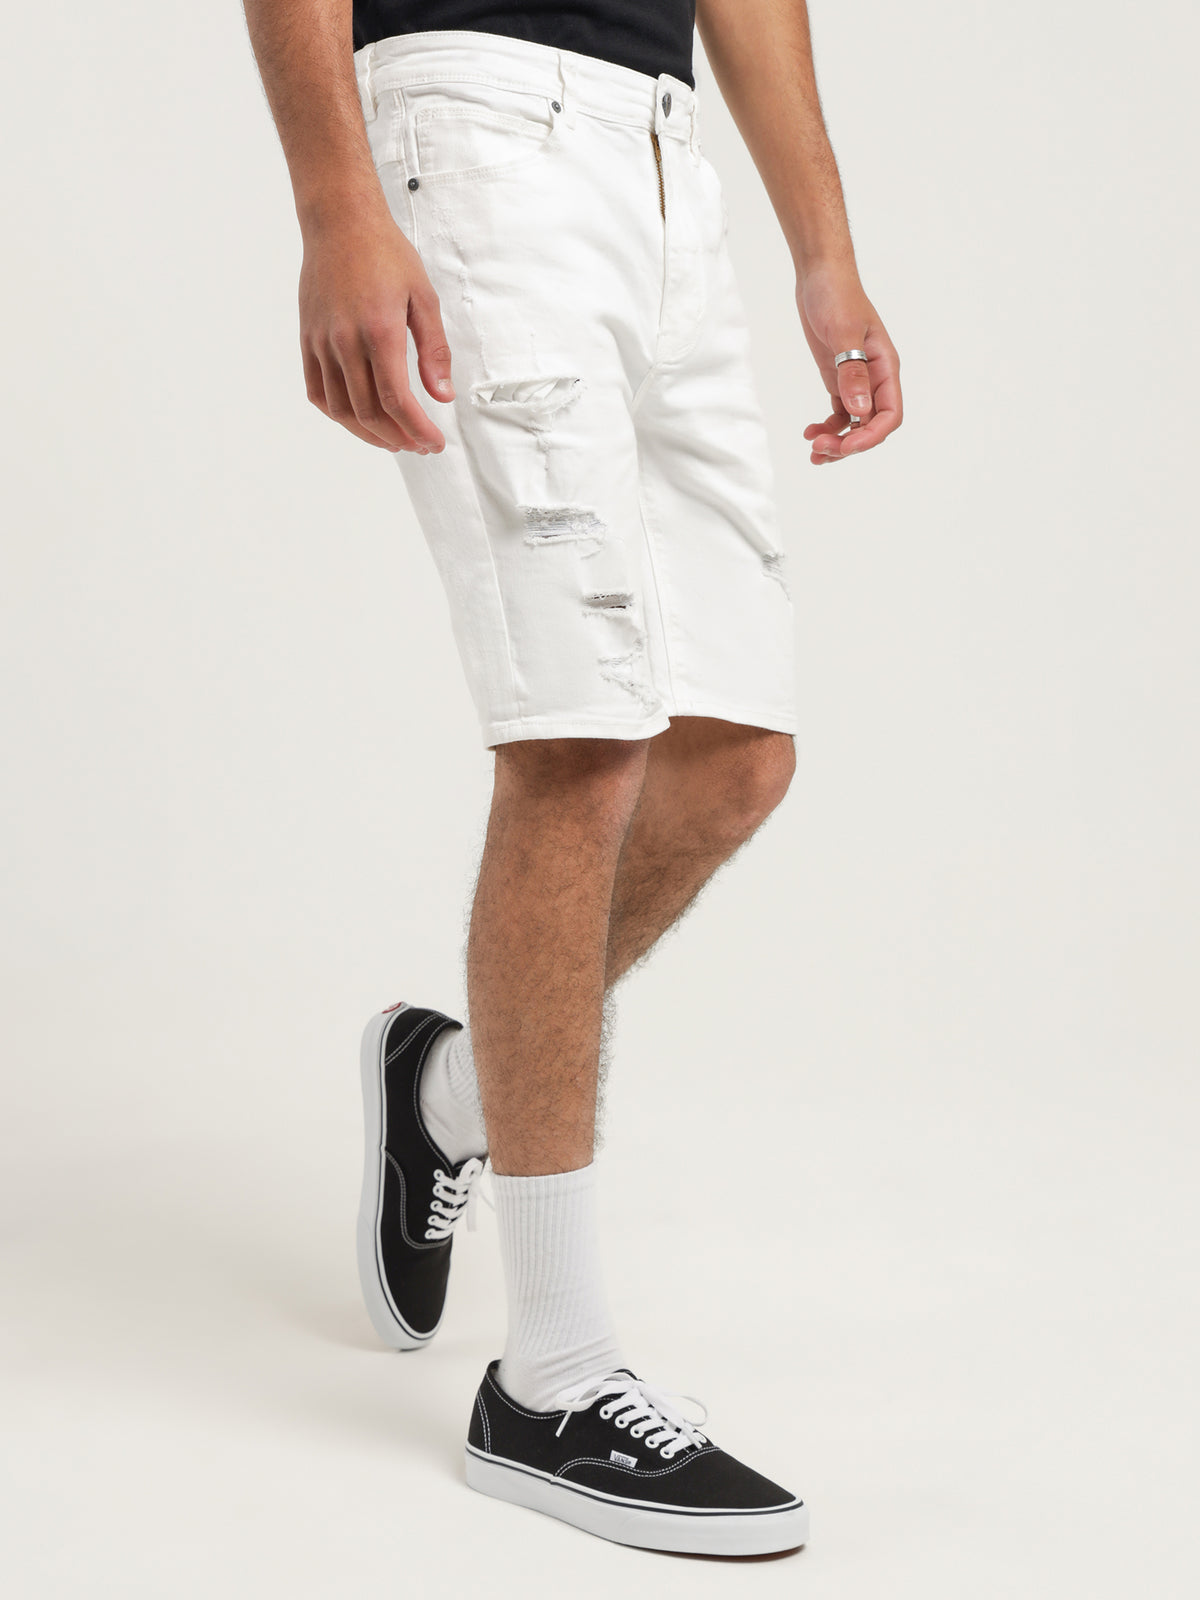 A Dropped Skinny Shorts in White